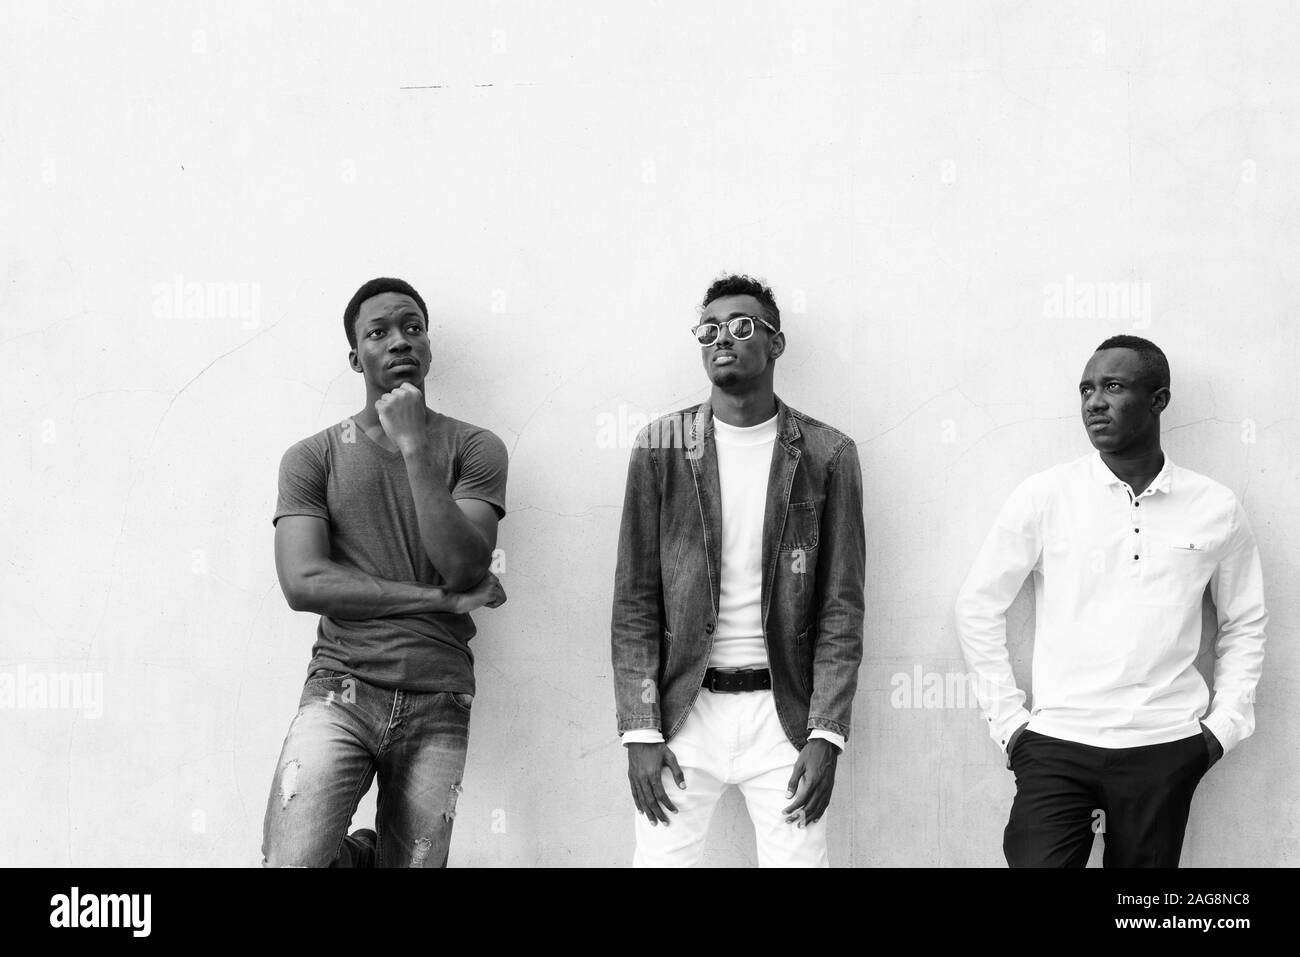 Three young African men hanging out against concrete wall outdoors Stock Photo